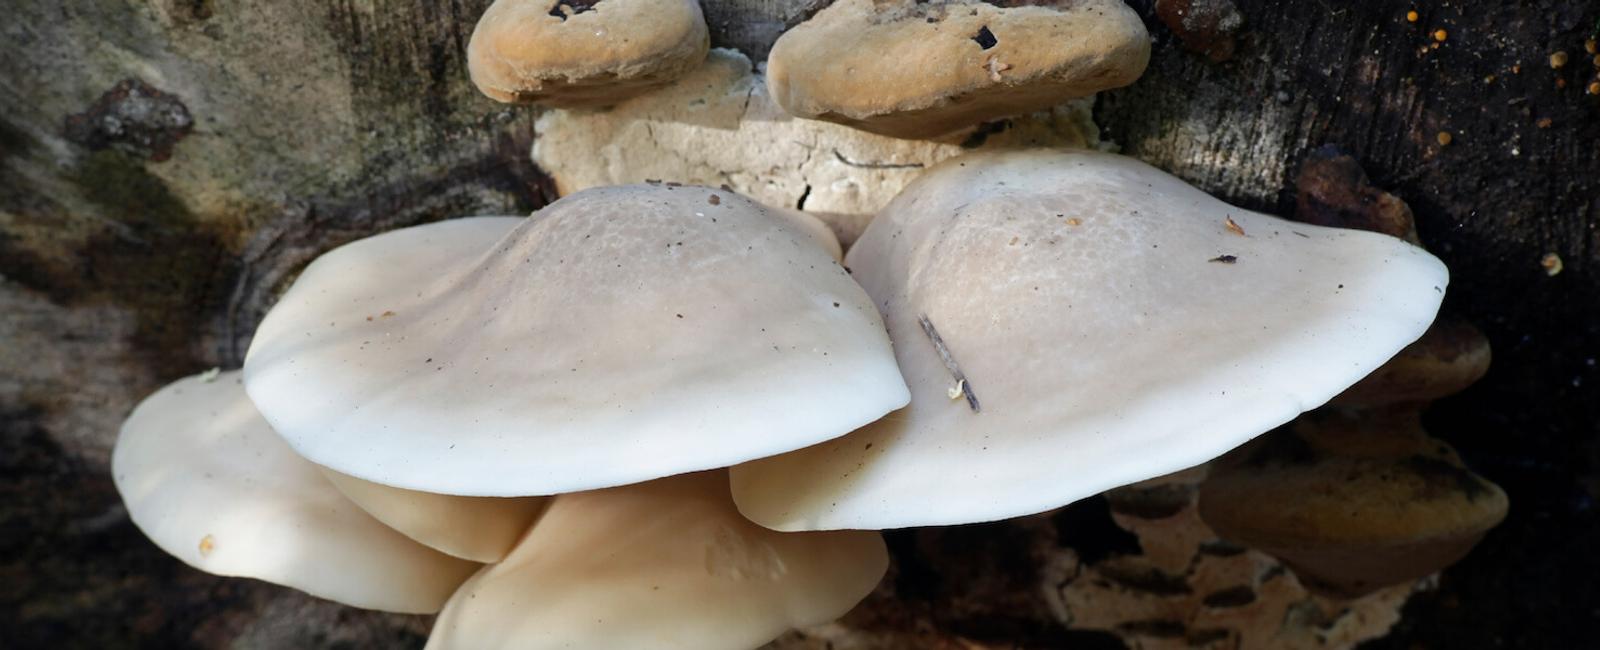 The Complete Guide to Elm Oyster Mushrooms